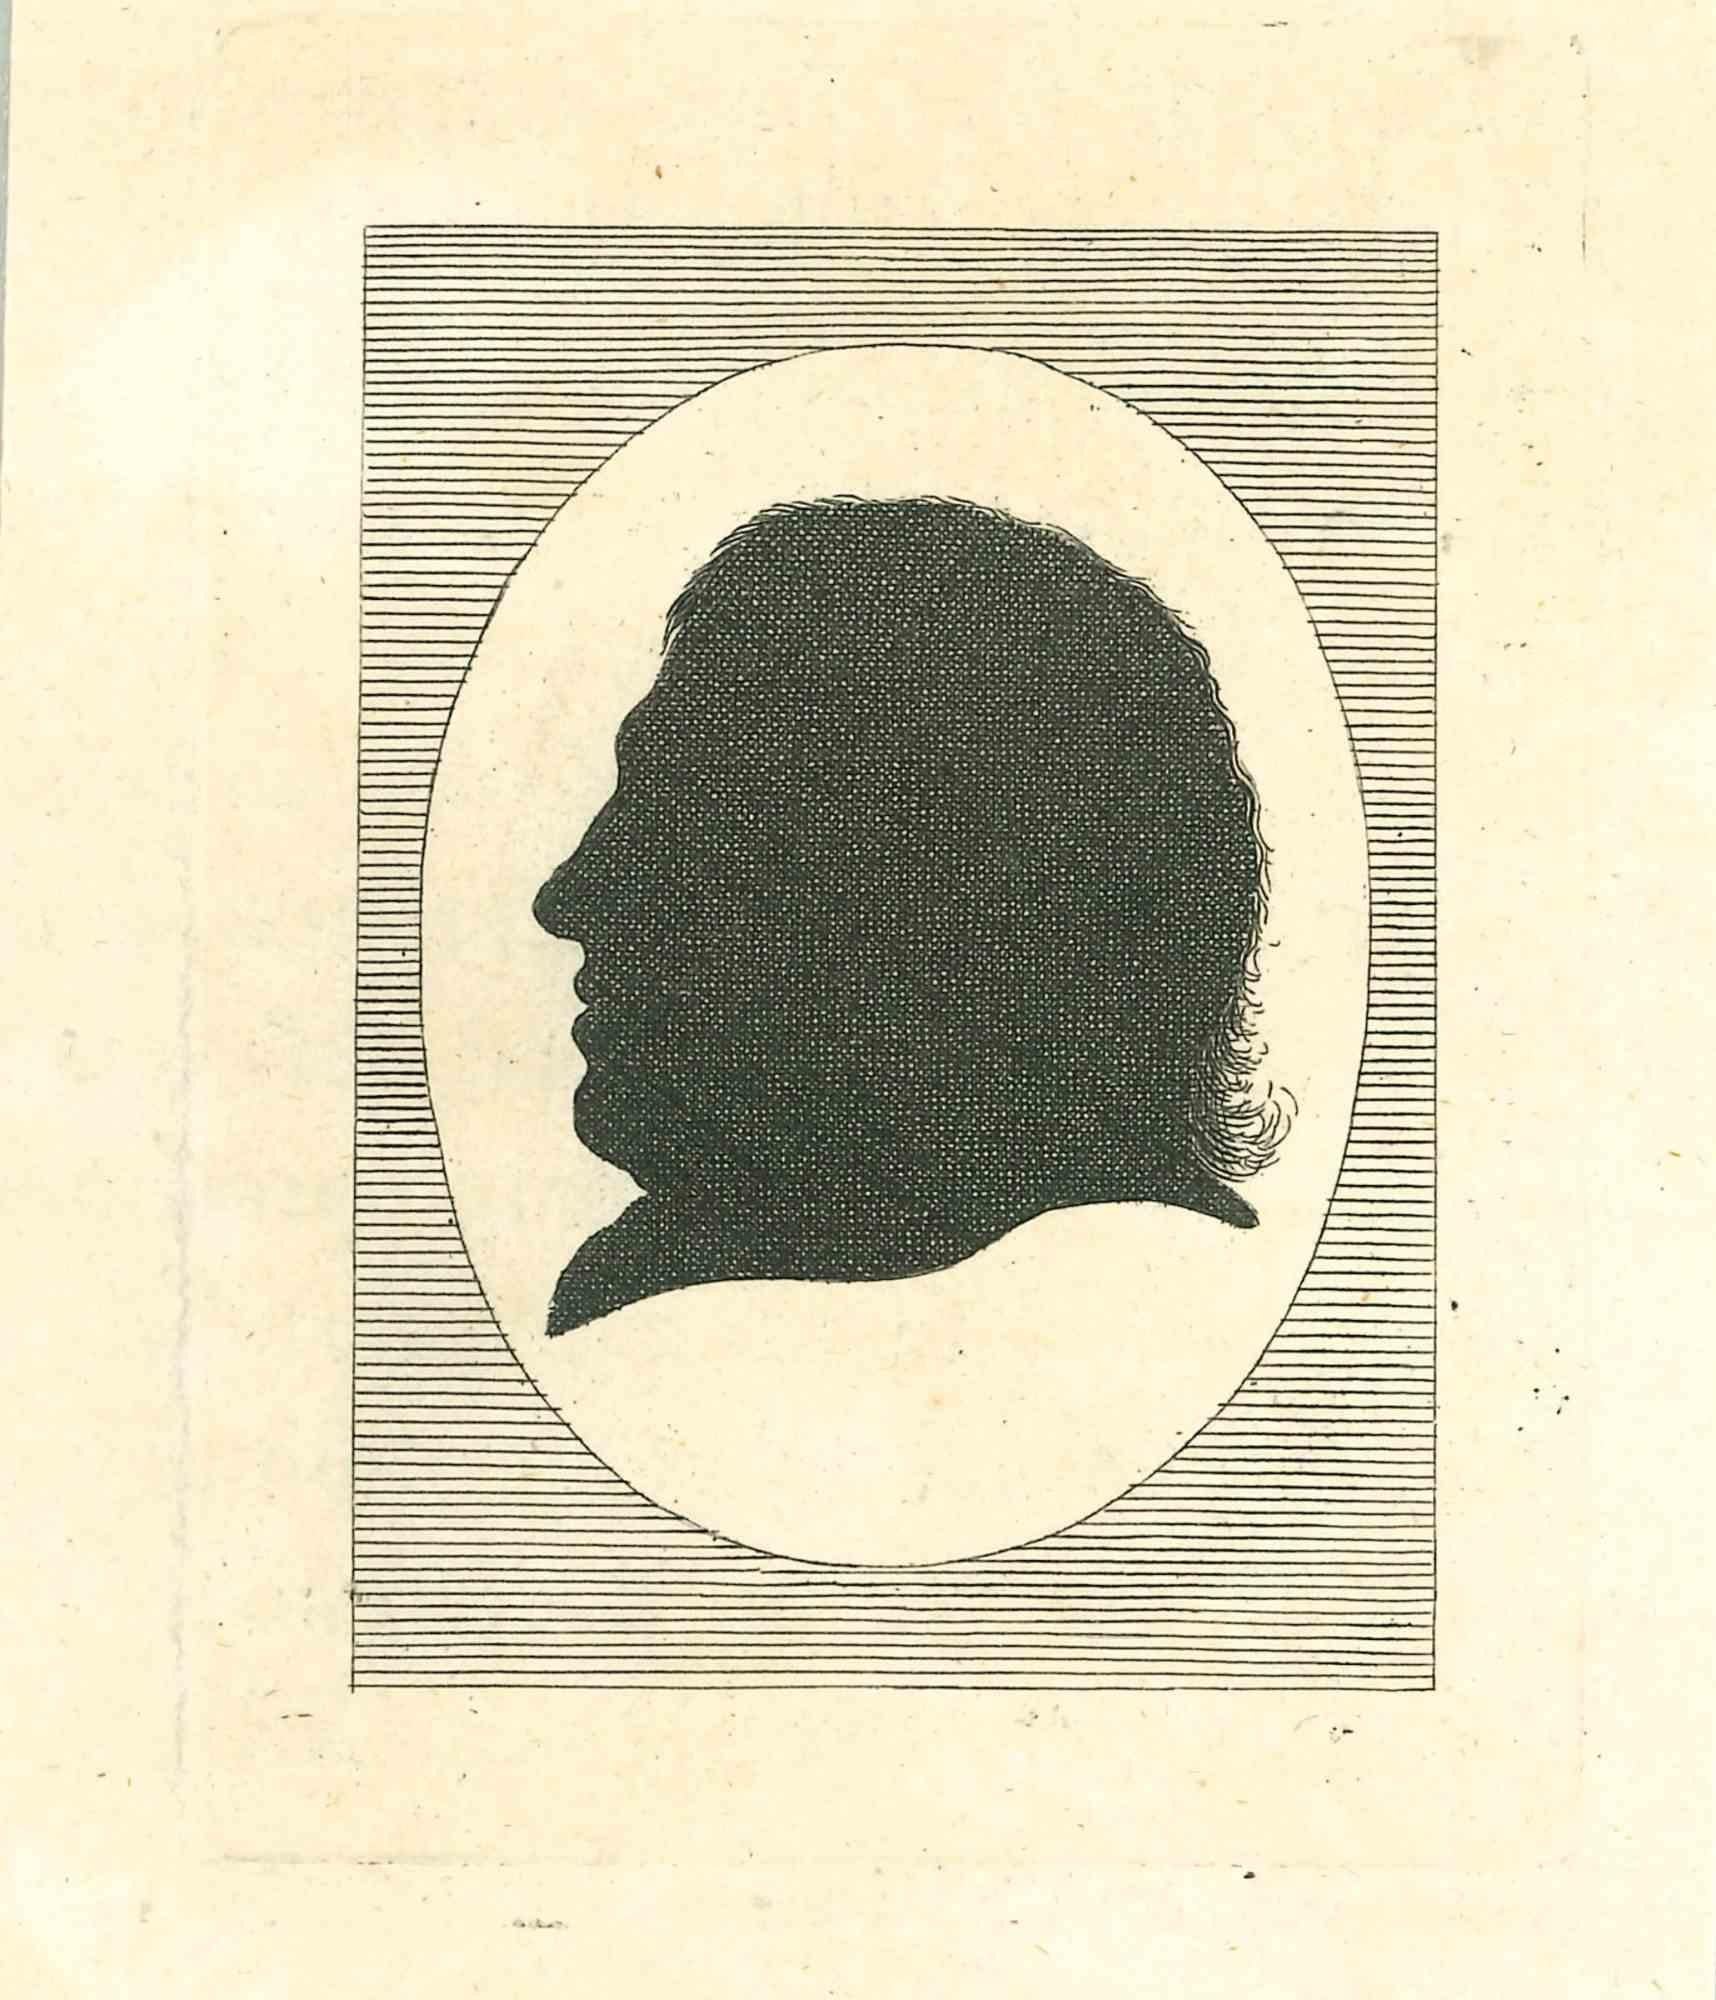 The Silhouette Profile - The Physiognomy is an original etching artwork realized by Thomas Holloway for Johann Caspar Lavater's "Essays on Physiognomy, Designed to Promote the Knowledge and the Love of Mankind", London, Bensley, 1810. 

Good